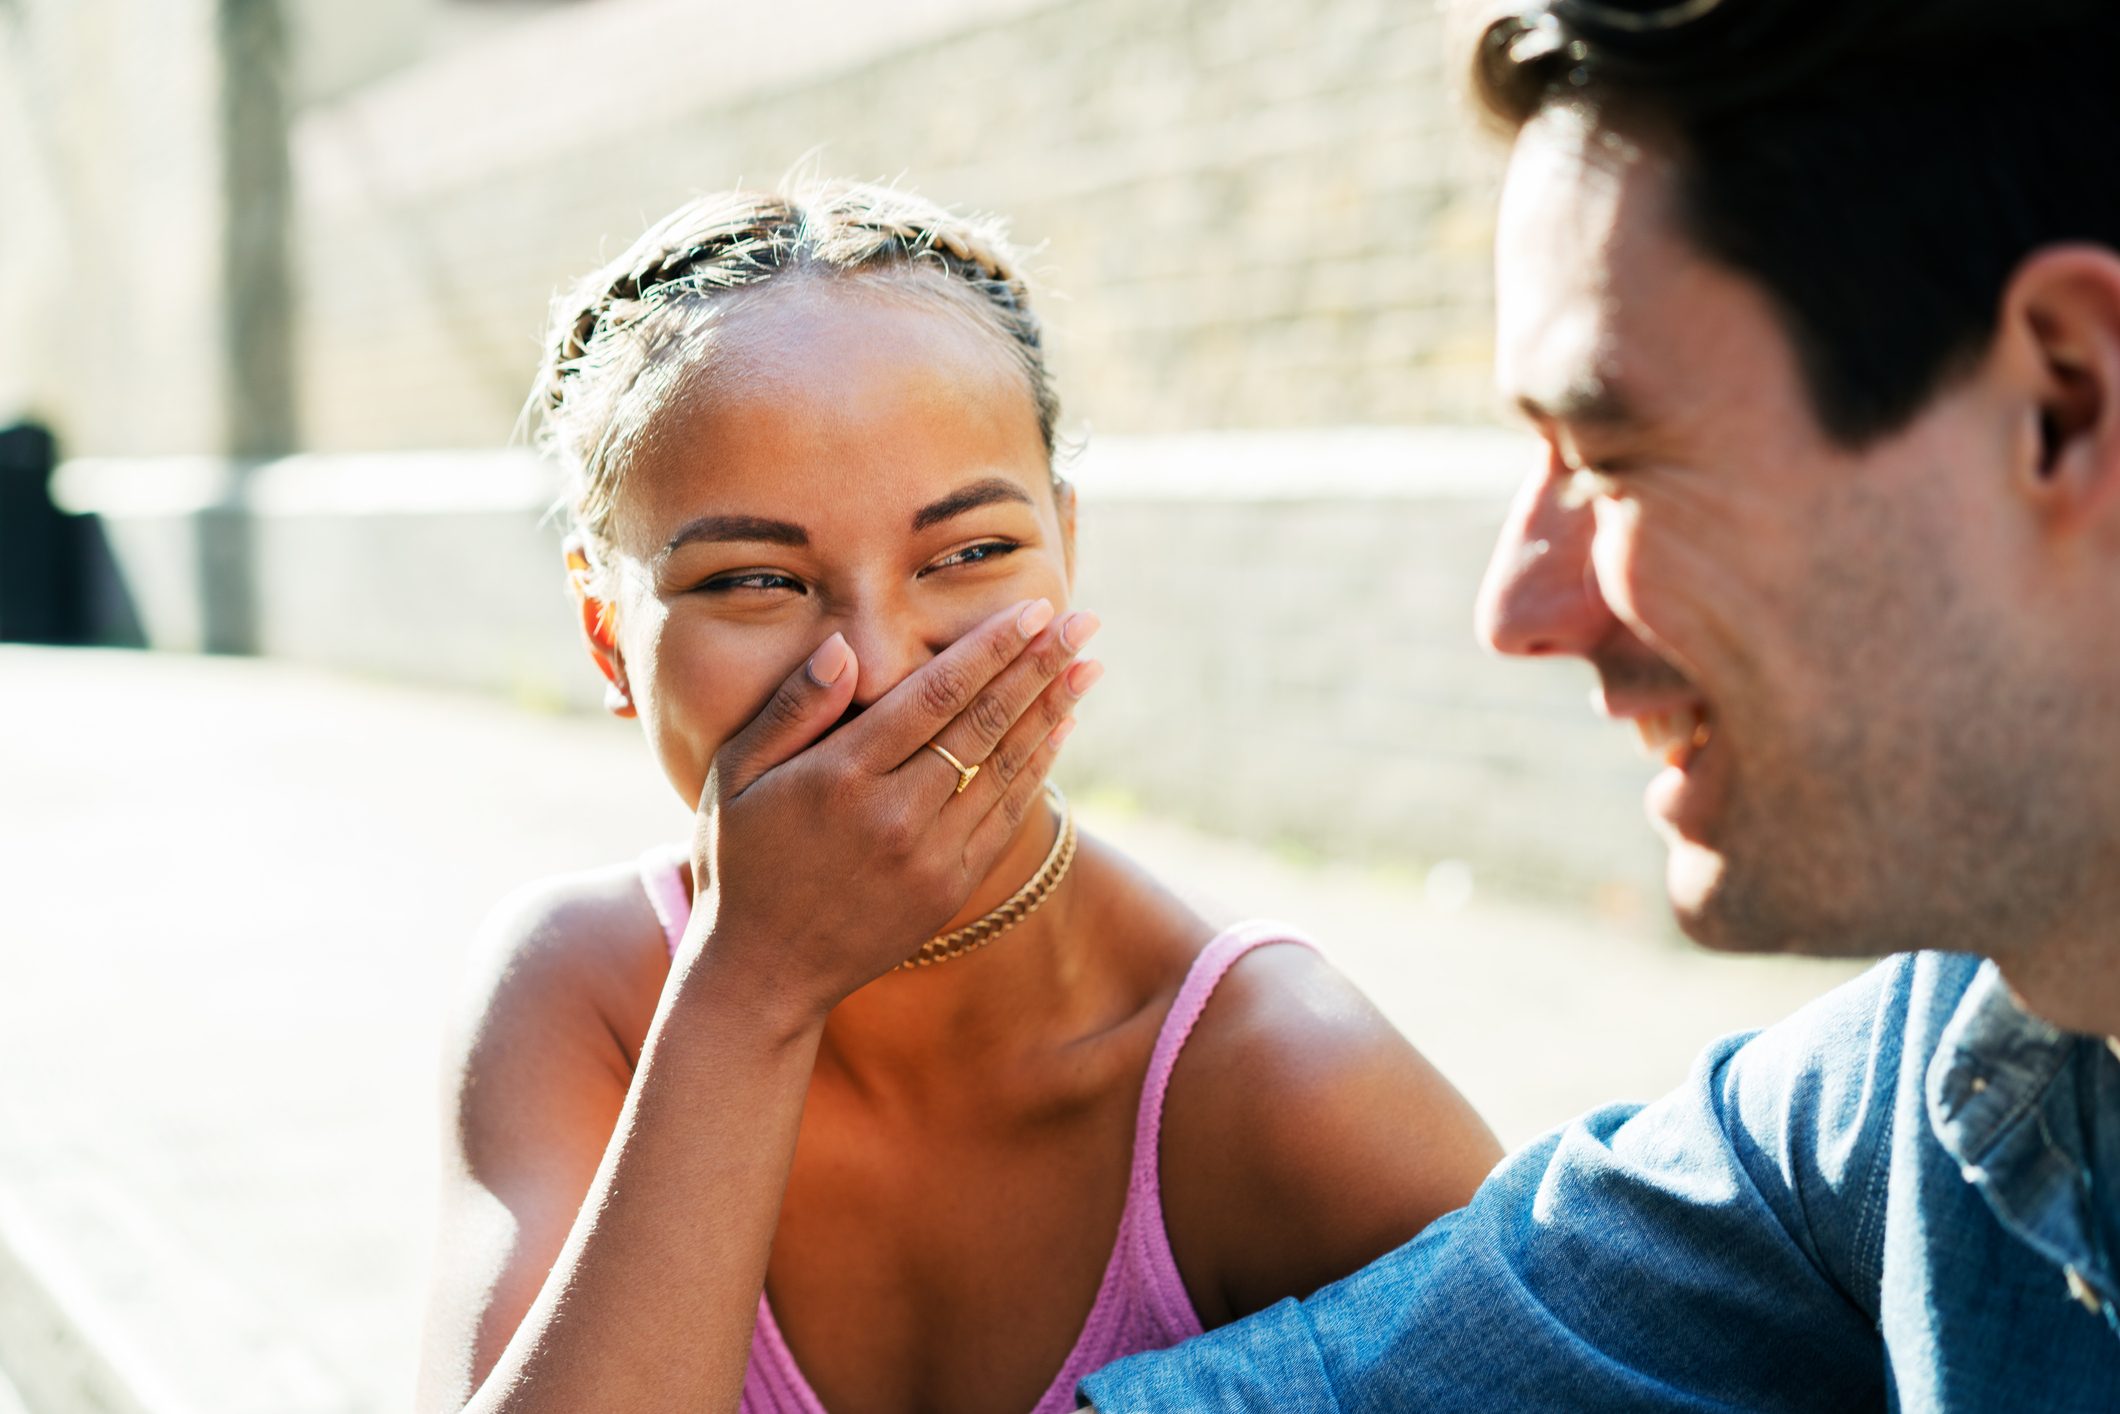 Bad Jokes That You Can't Help But Laugh At | Reader's Digest